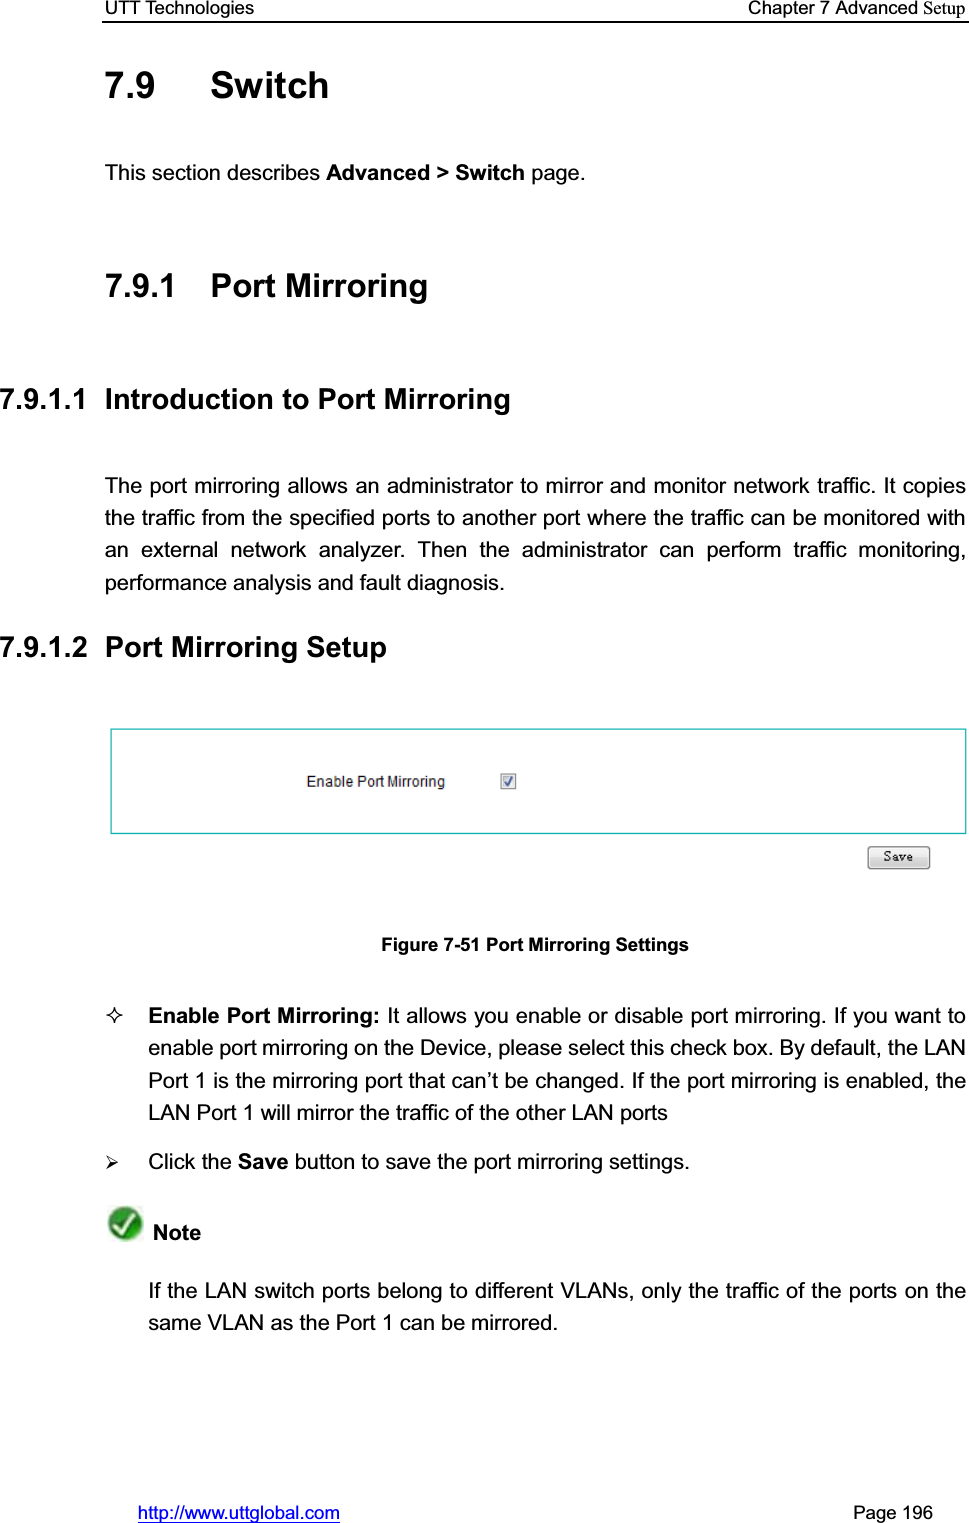 UTT Technologies    Chapter 7 Advanced Setuphttp://www.uttglobal.com                                                       Page 196 7.9 Switch This section describes Advanced &gt; Switch page. 7.9.1 Port Mirroring 7.9.1.1  Introduction to Port Mirroring The port mirroring allows an administrator to mirror and monitor network traffic. It copies the traffic from the specified ports to another port where the traffic can be monitored with an external network analyzer. Then the administrator can perform traffic monitoring, performance analysis and fault diagnosis.7.9.1.2 Port Mirroring Setup Figure 7-51 Port Mirroring Settings Enable Port Mirroring: It allows you enable or disable port mirroring. If you want to enable port mirroring on the Device, please select this check box. By default, the LAN Port 1 is the mirroring port that can¶t be changed. If the port mirroring is enabled, the LAN Port 1 will mirror the traffic of the other LAN ports ¾Click the Save button to save the port mirroring settings.NoteIf the LAN switch ports belong to different VLANs, only the traffic of the ports on the same VLAN as the Port 1 can be mirrored. 